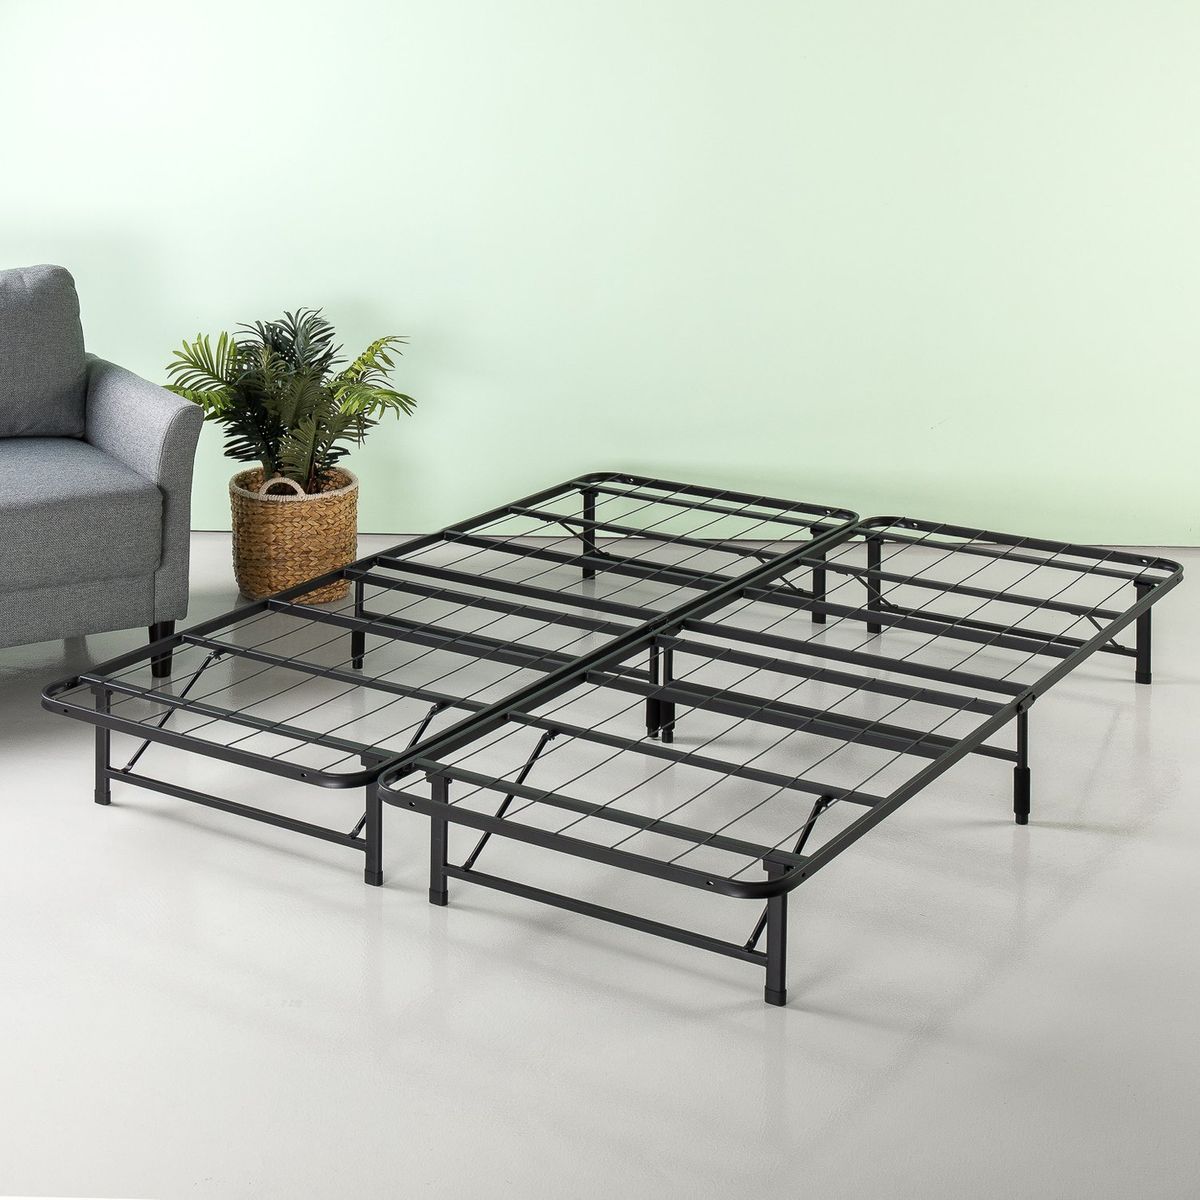 19 Best Metal Bed Frames 2020 The, Night Therapy Smart Base Steel Bed Frame Foundation Full